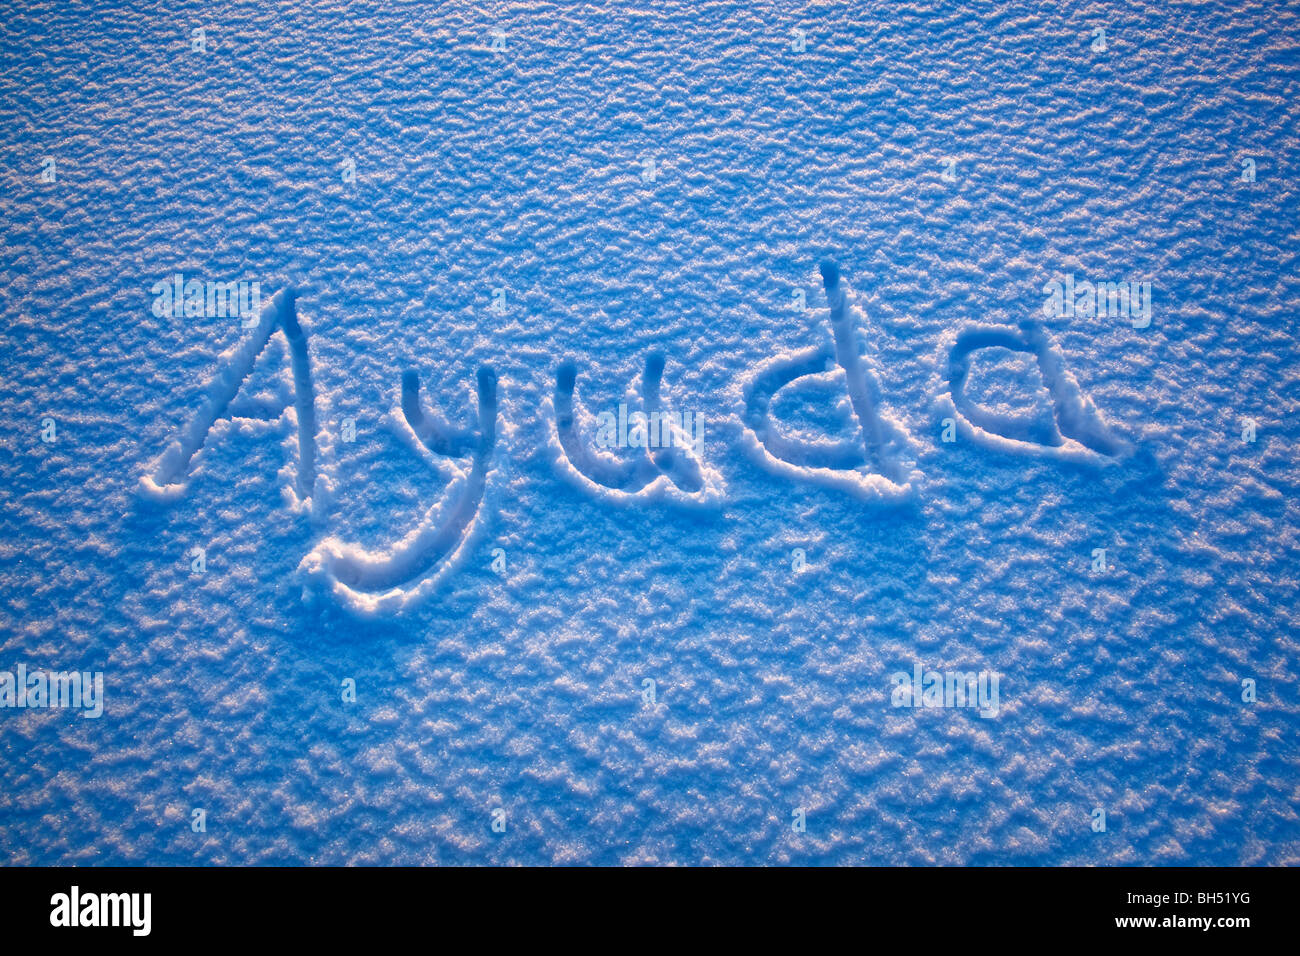 The Spanish word for 'help' spelled out in the snow Stock Photo